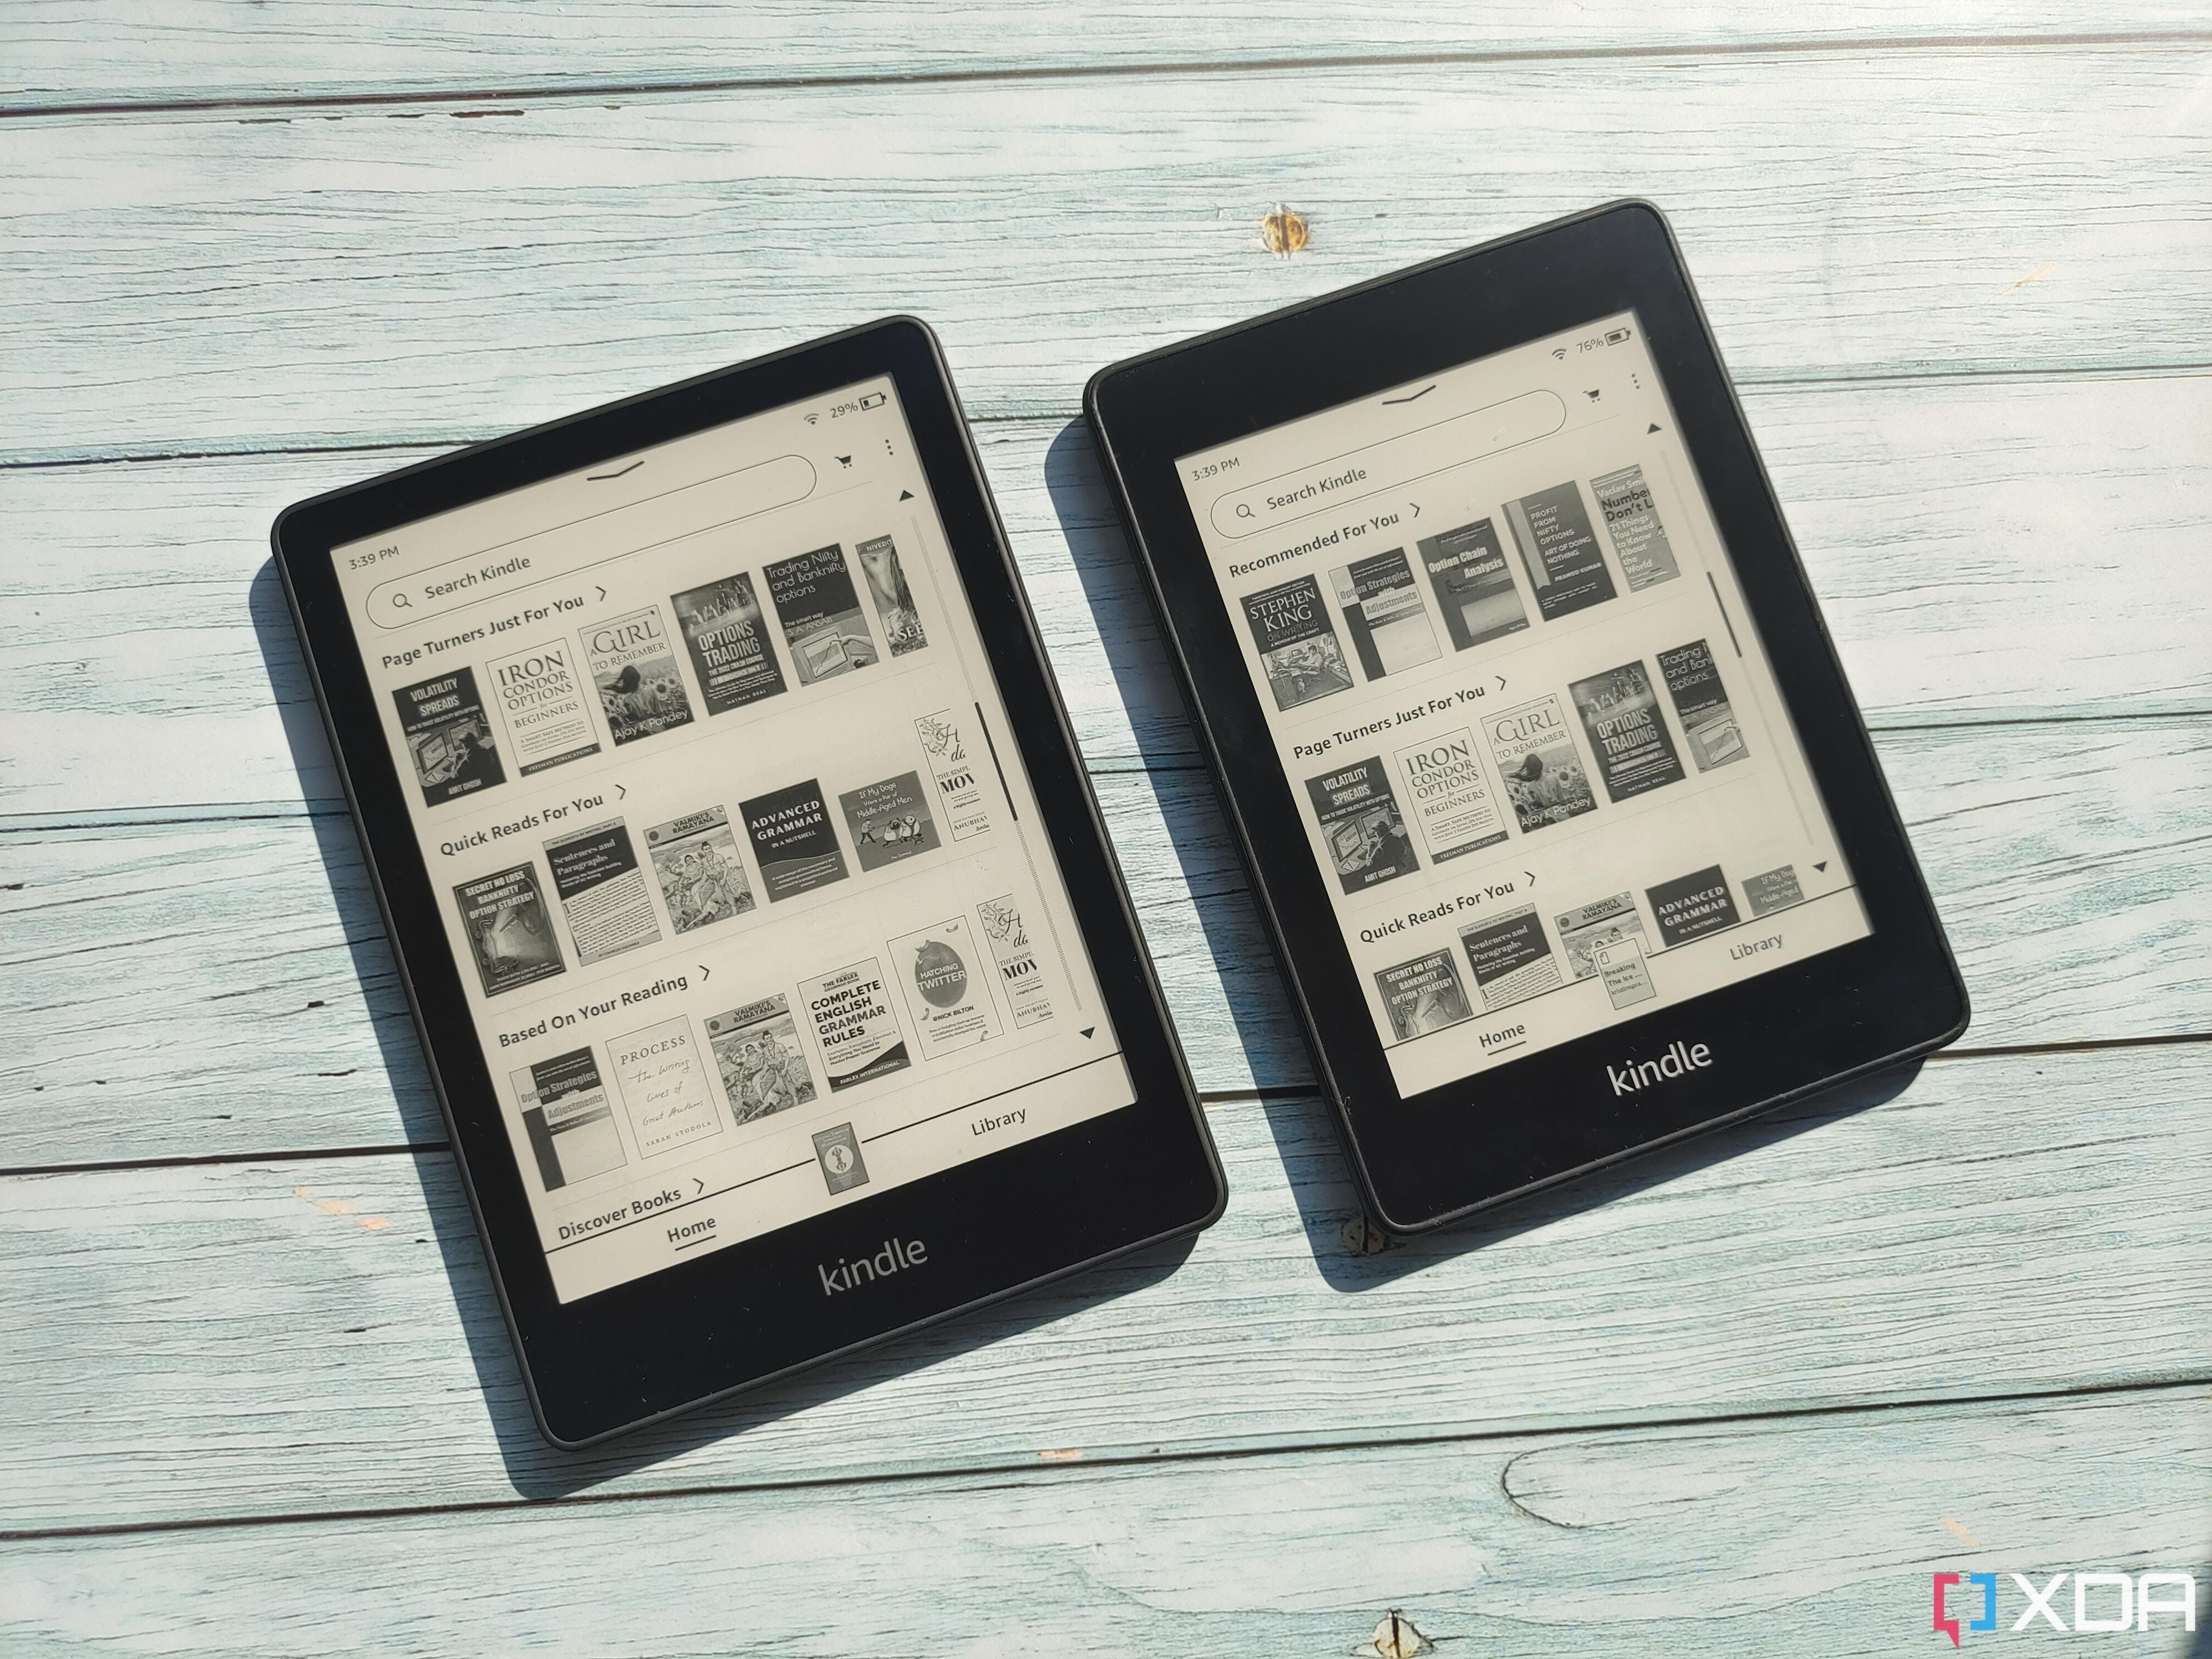 New 2021 Kindle Paperwhite eBook Readers Are Now Available - IGN